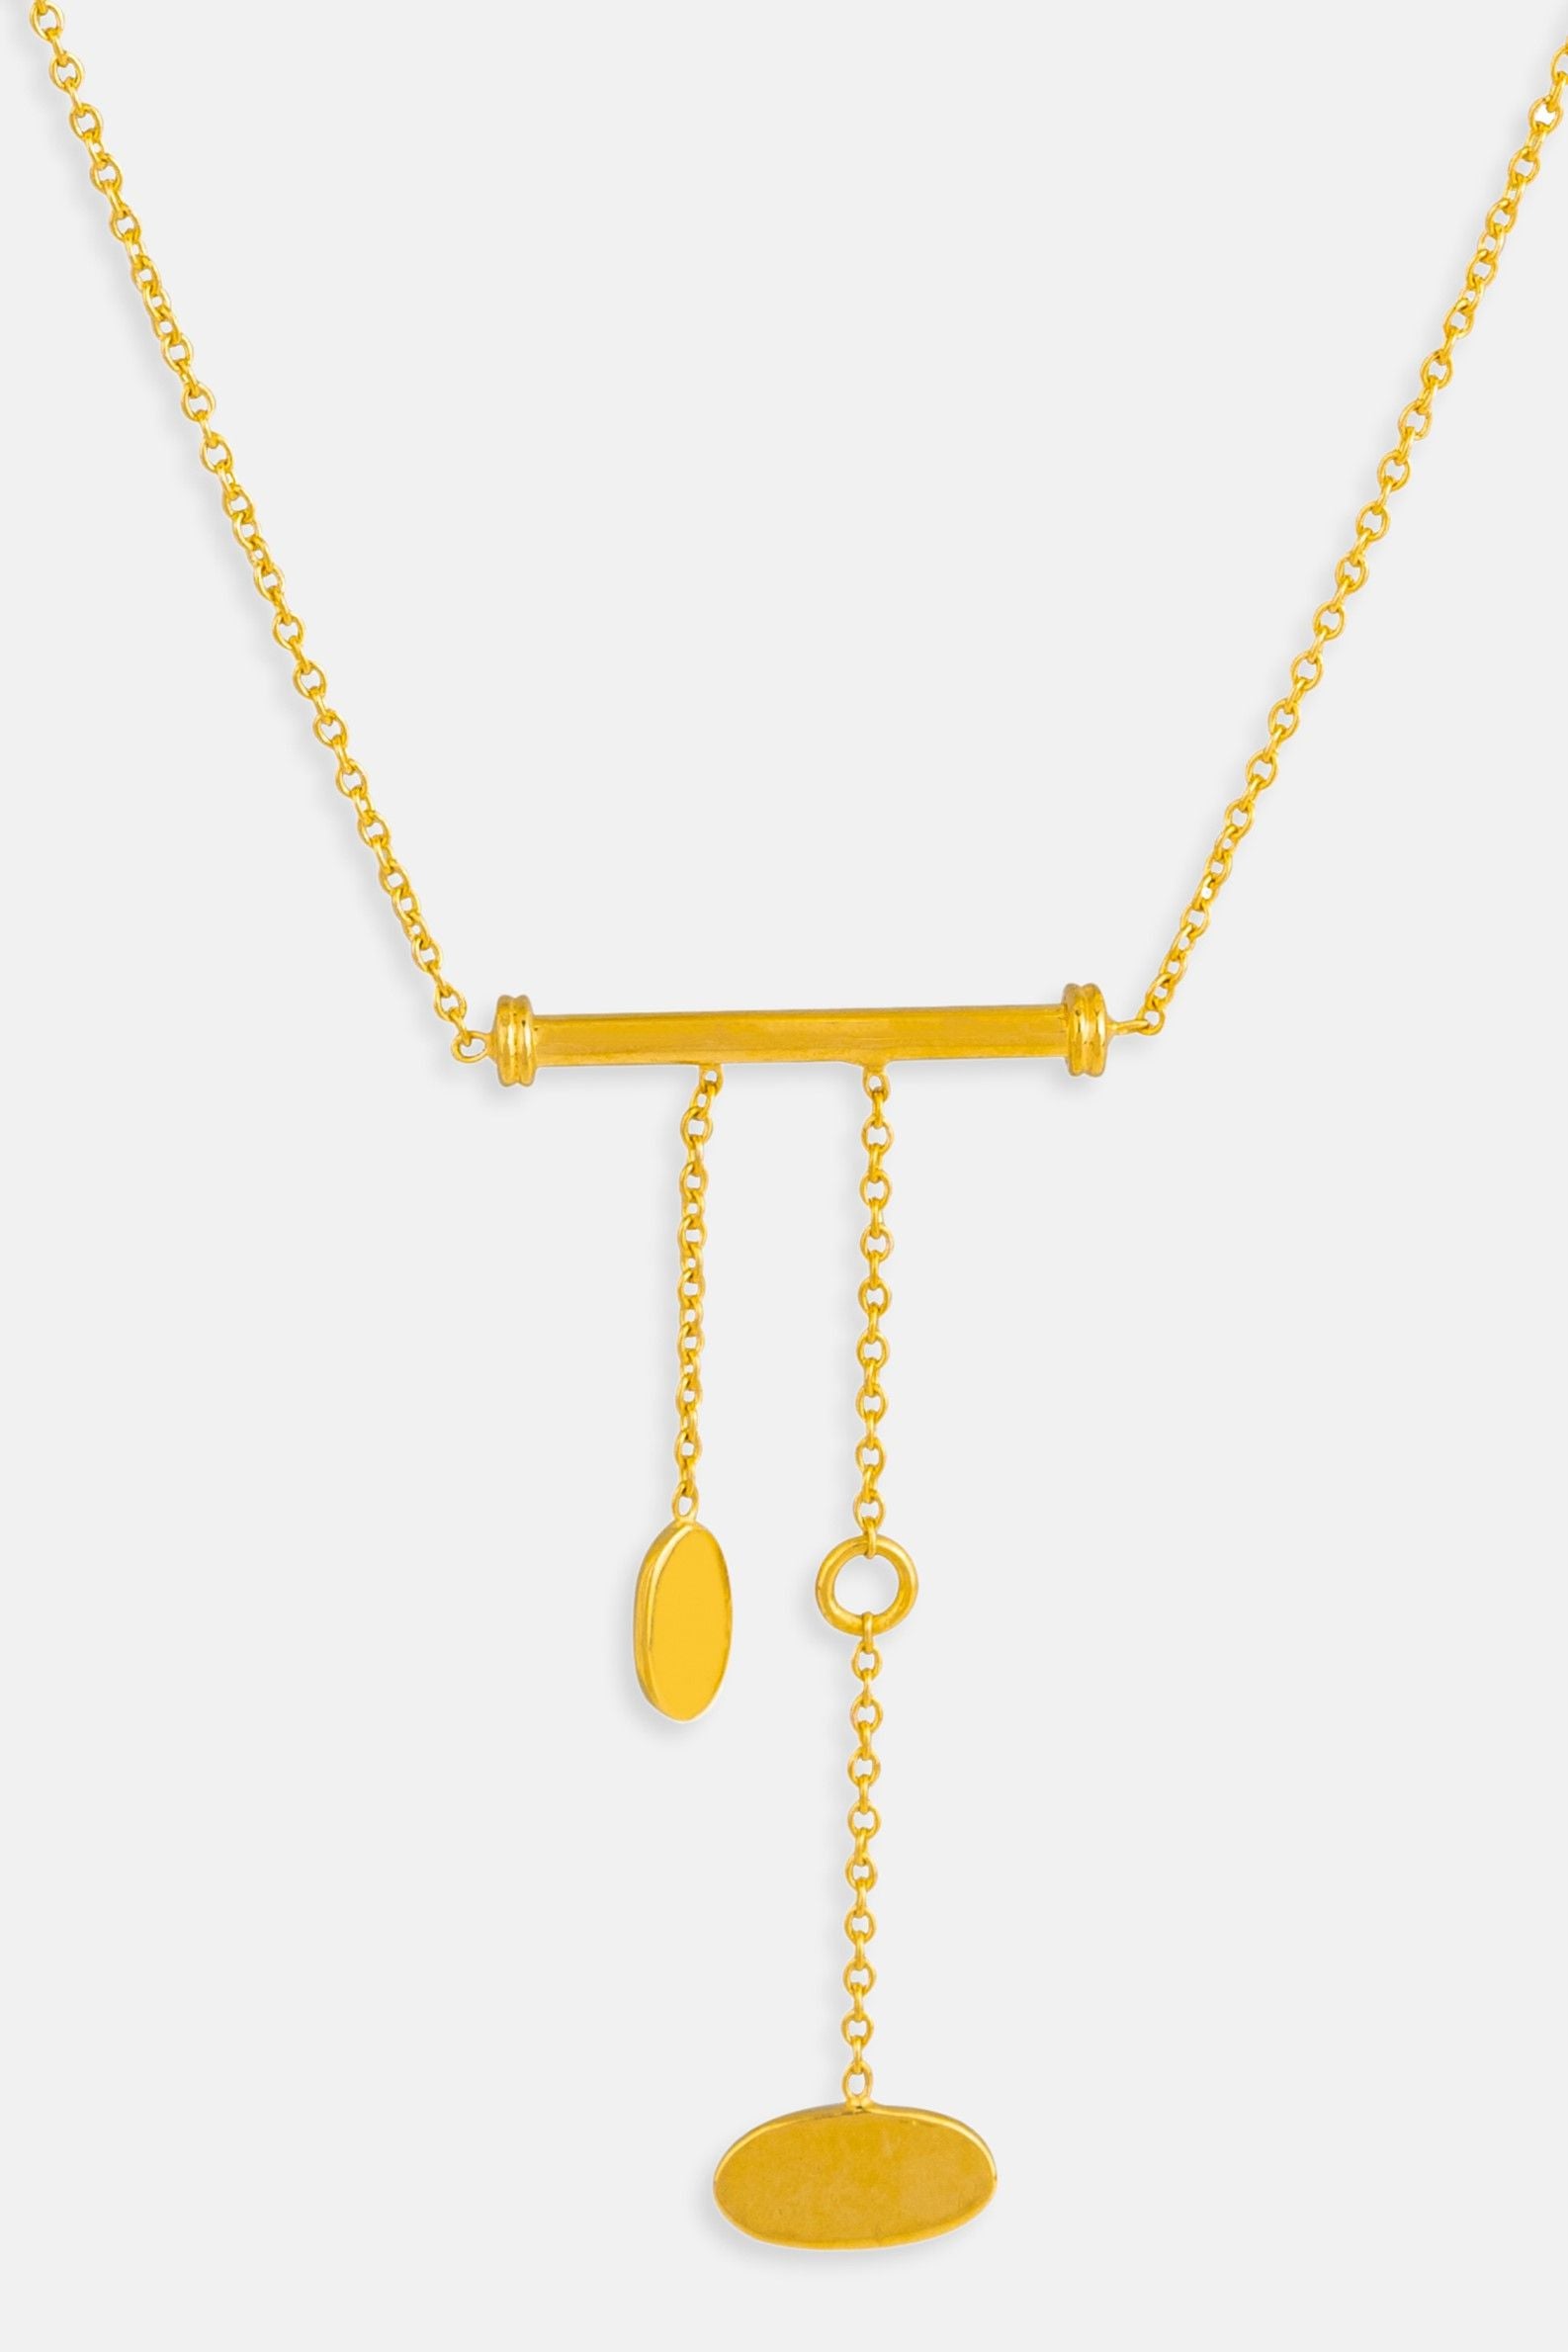 César Delicate Gold Chain Necklace with Two Hanging Tassels Mamour Paris Jewellery